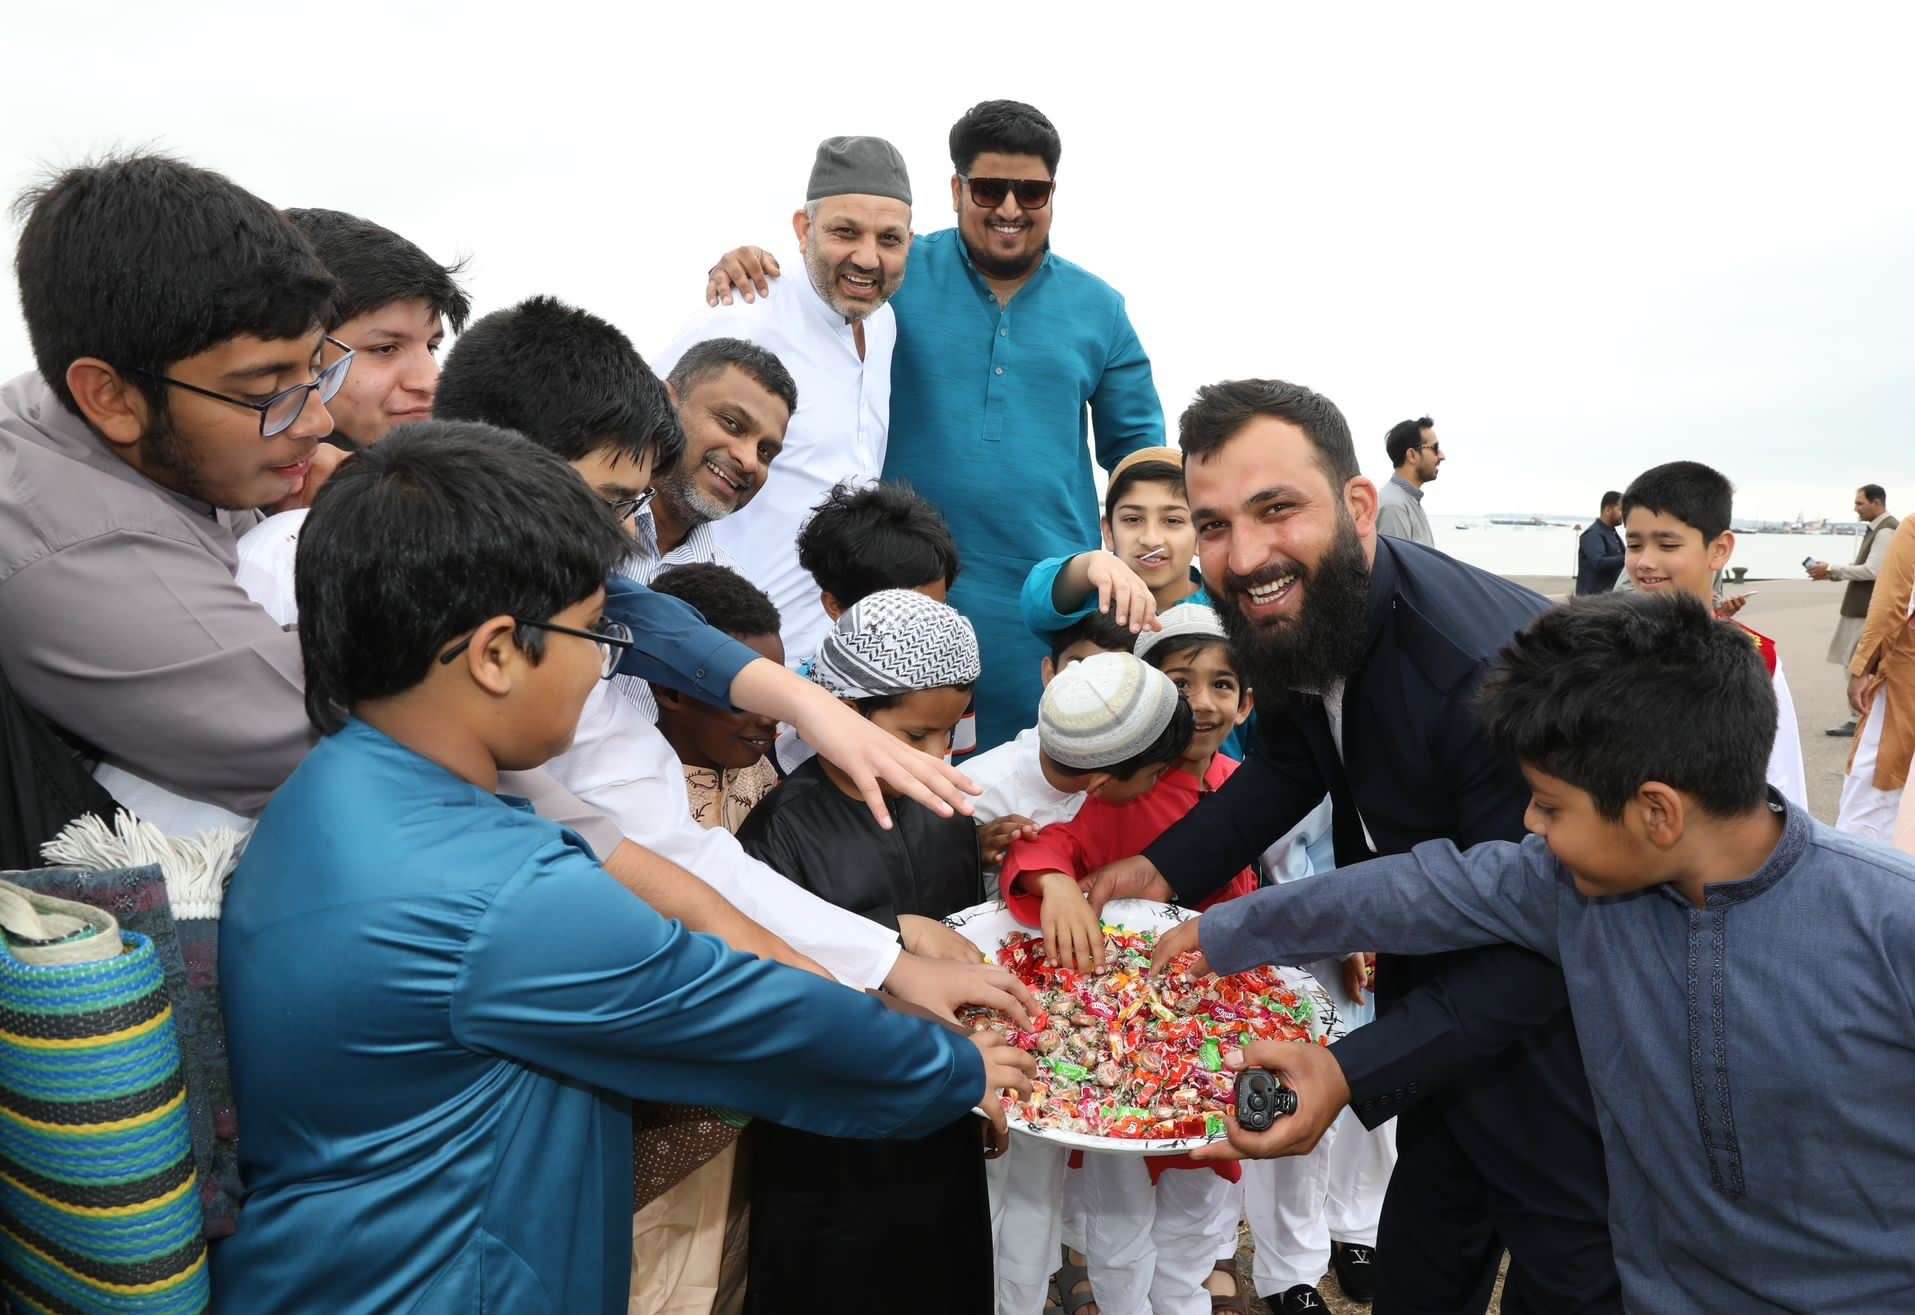 Children are often given gifts on the Islamic holiday